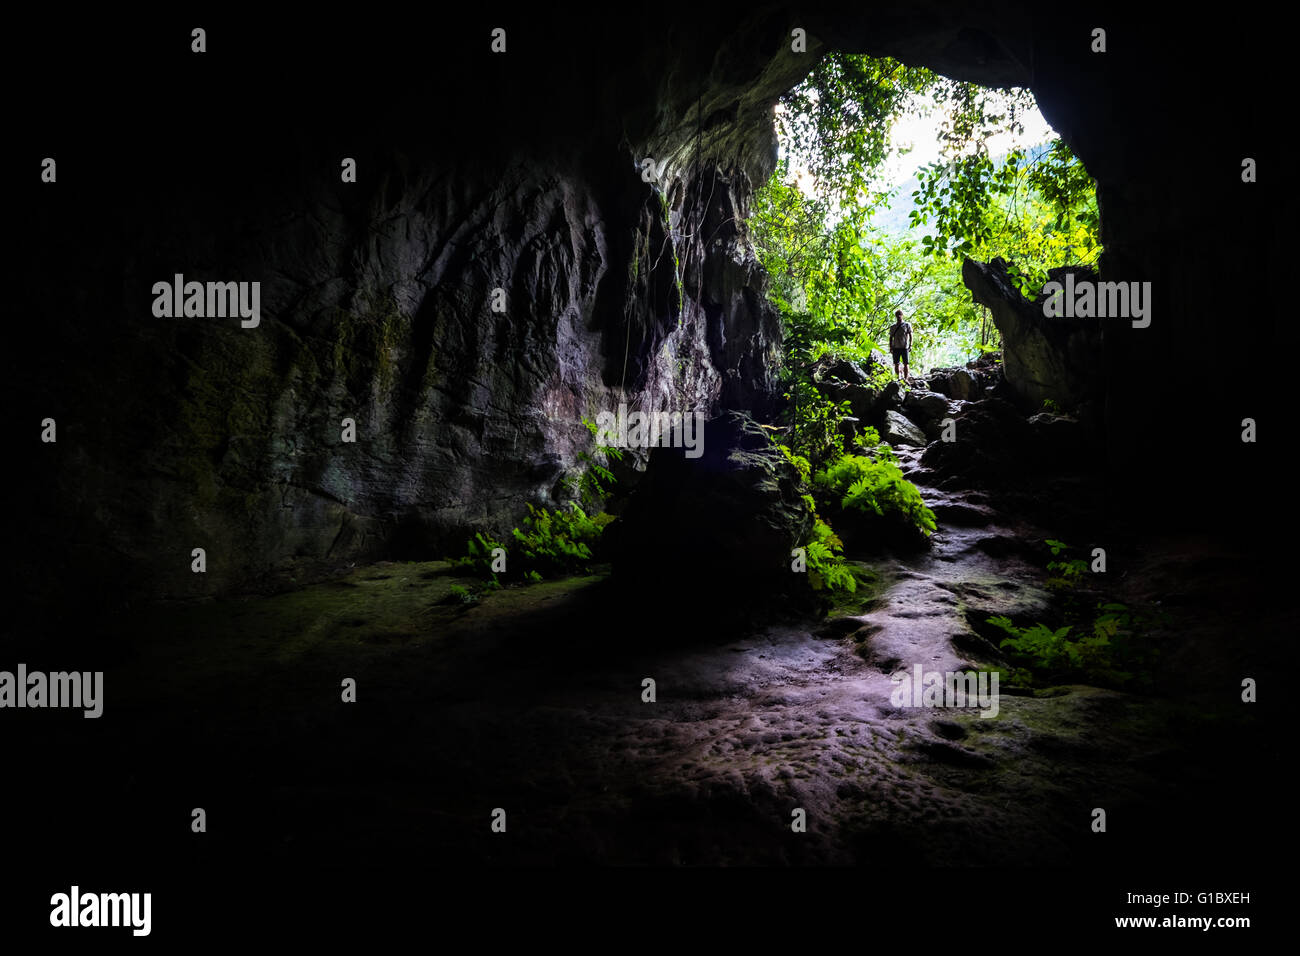 A man stands and looks in through the entrance to Tham Kang Cave near Nong Khiaw in Laos Stock Photo